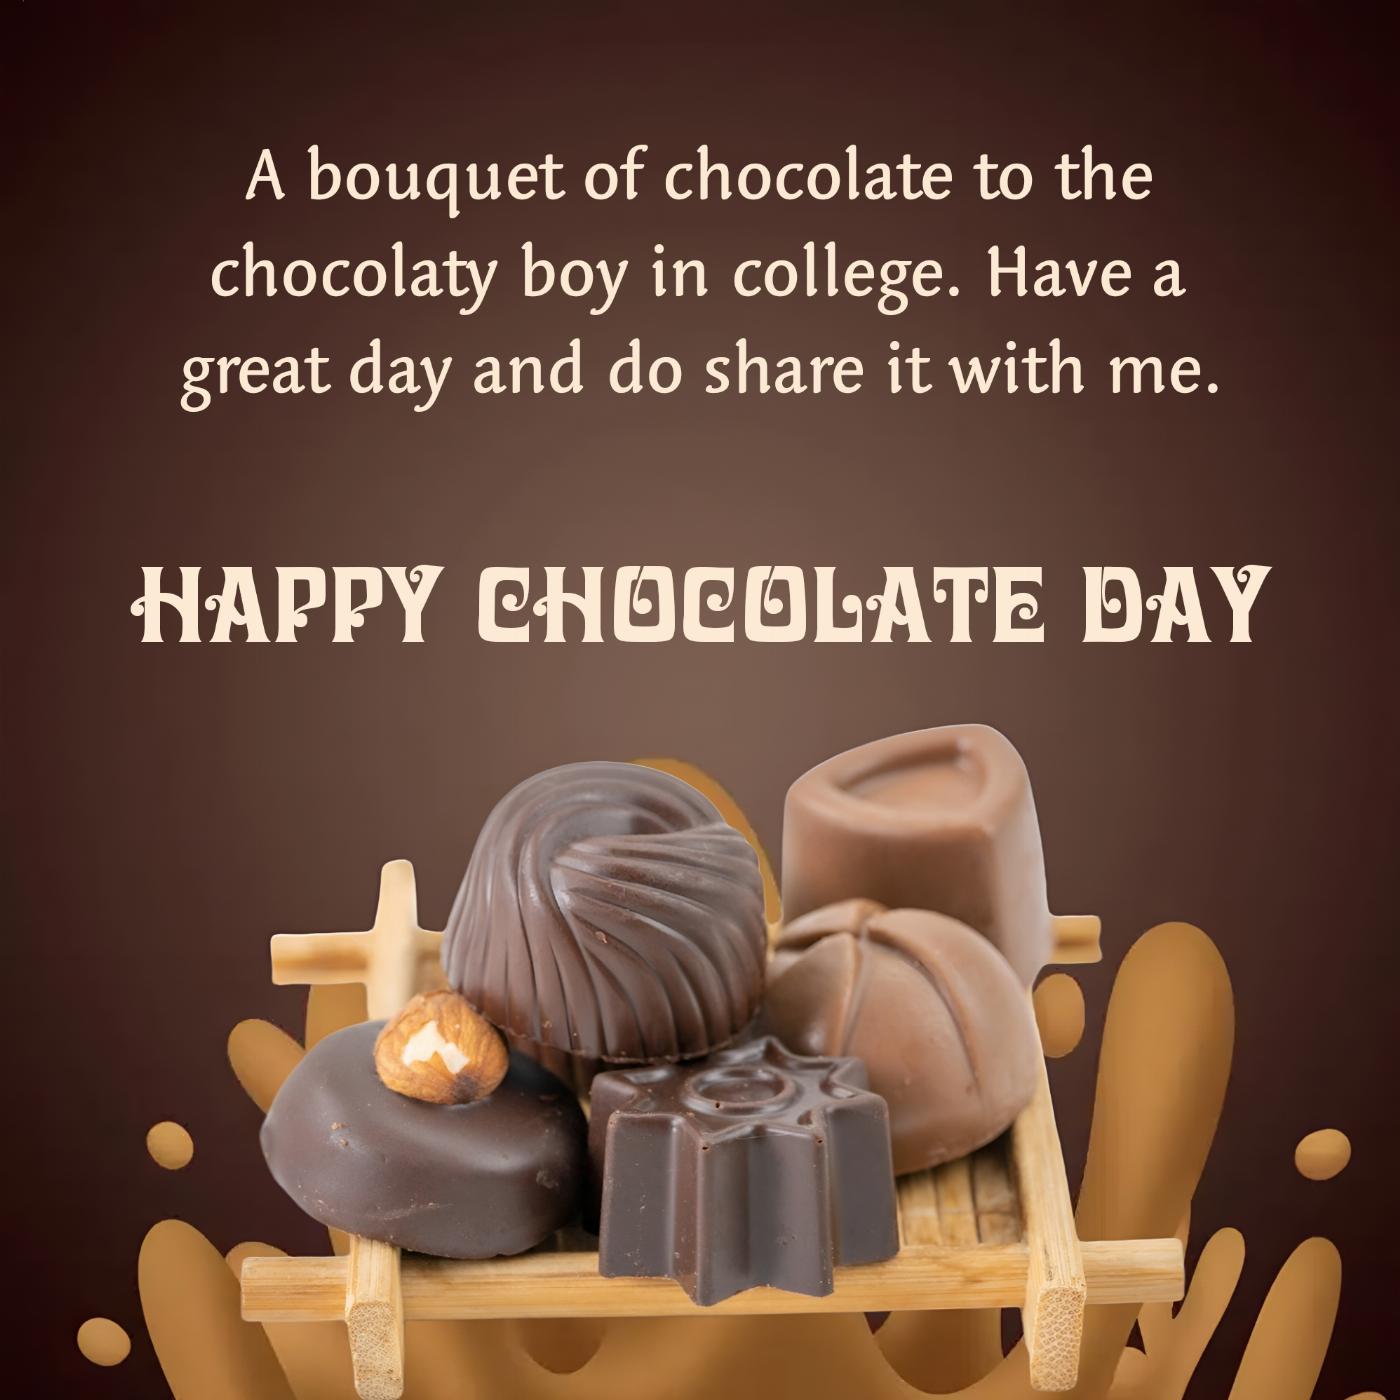 A bouquet of chocolate to the chocolaty boy in college